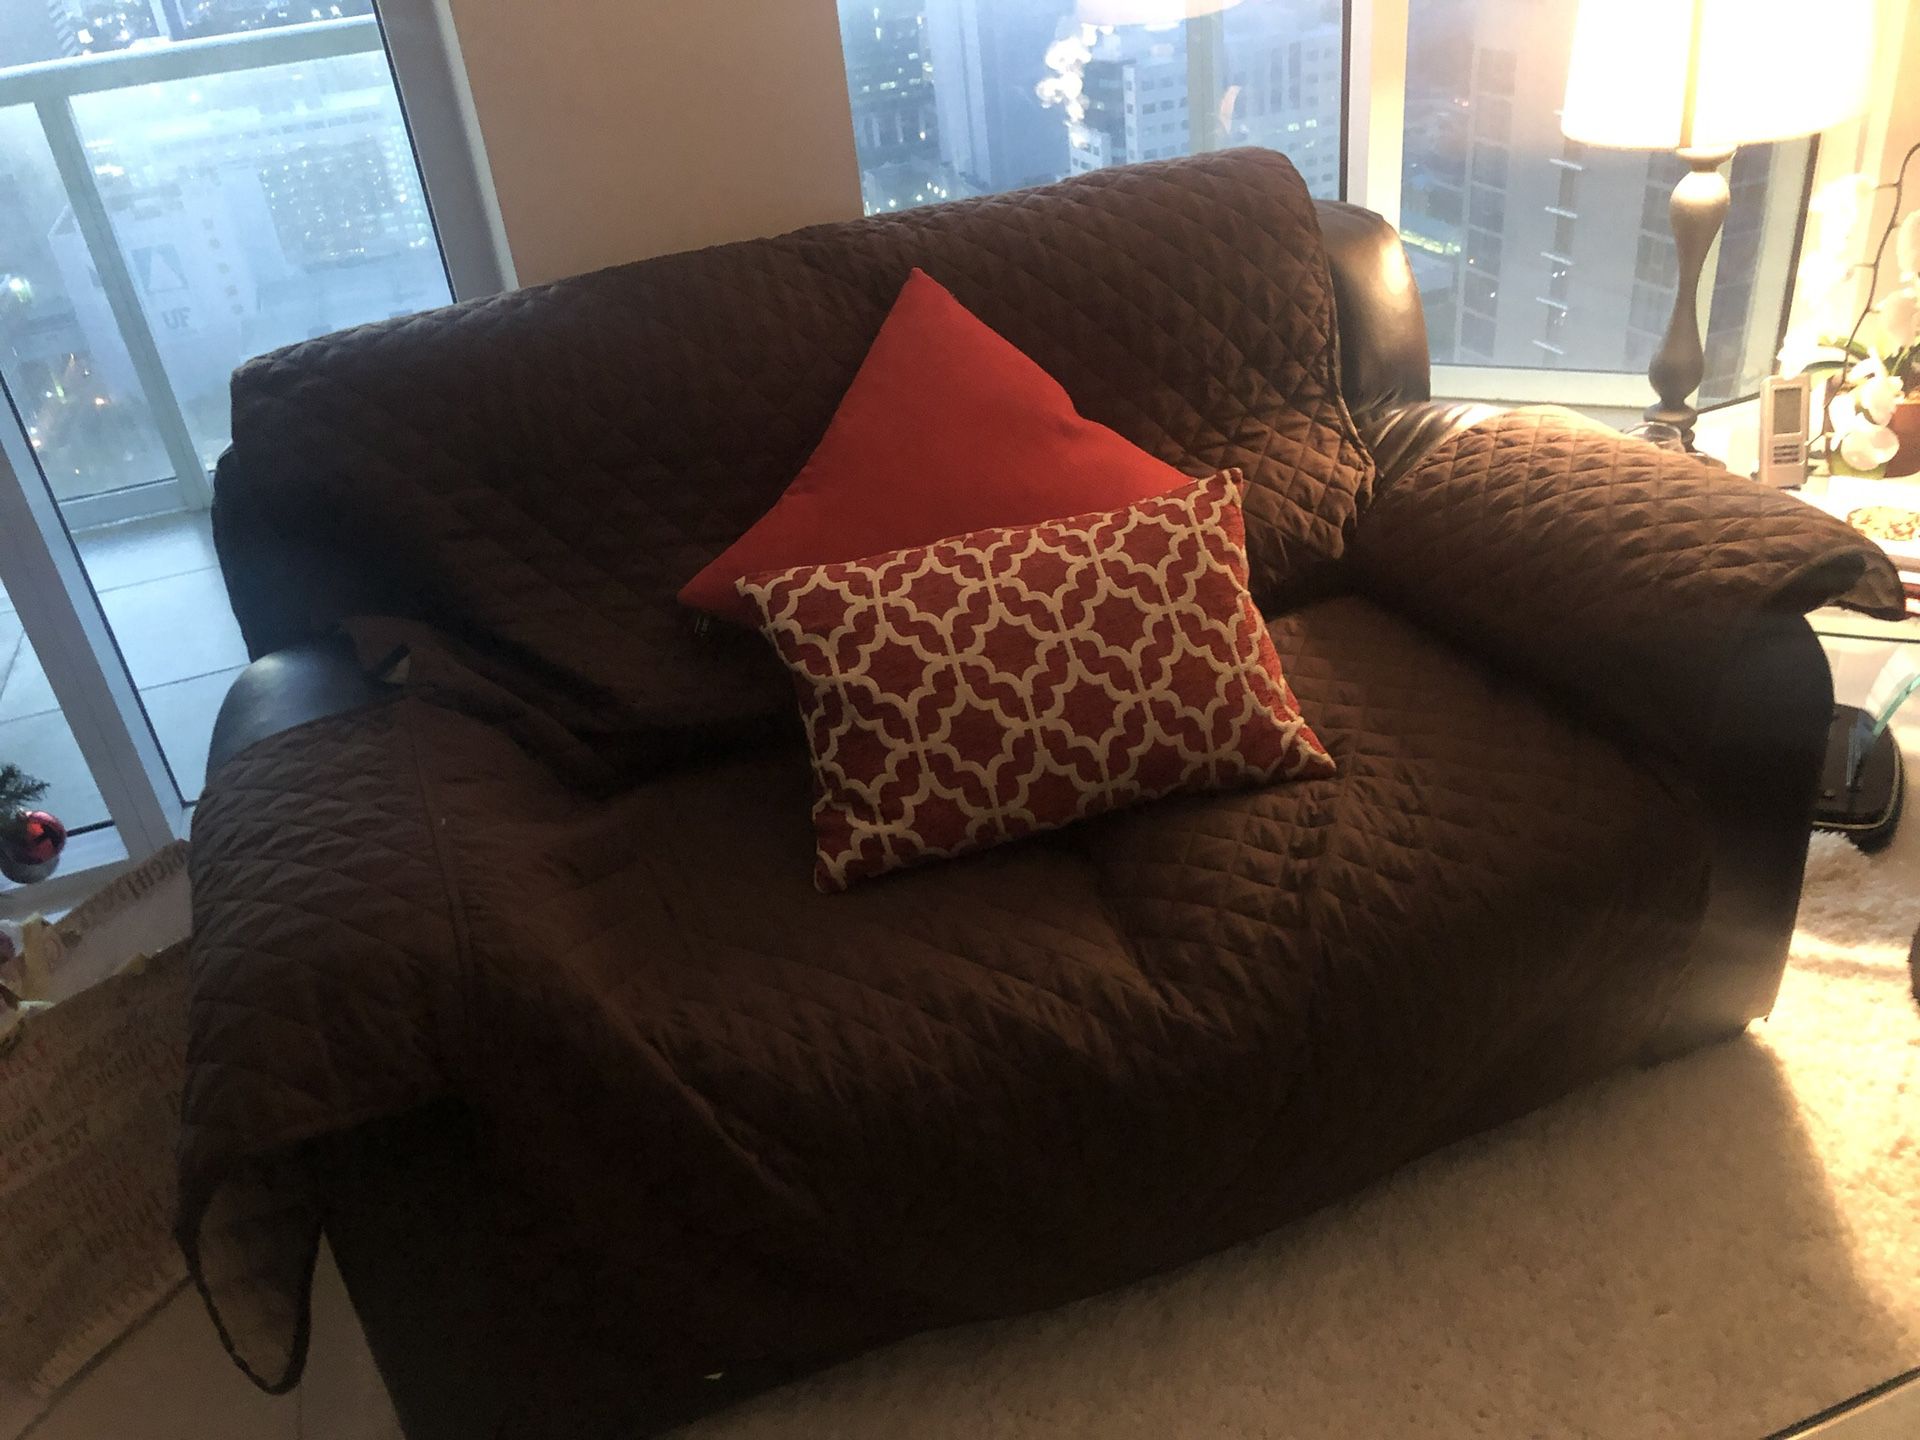 FREE-leather couches with covers and pillows